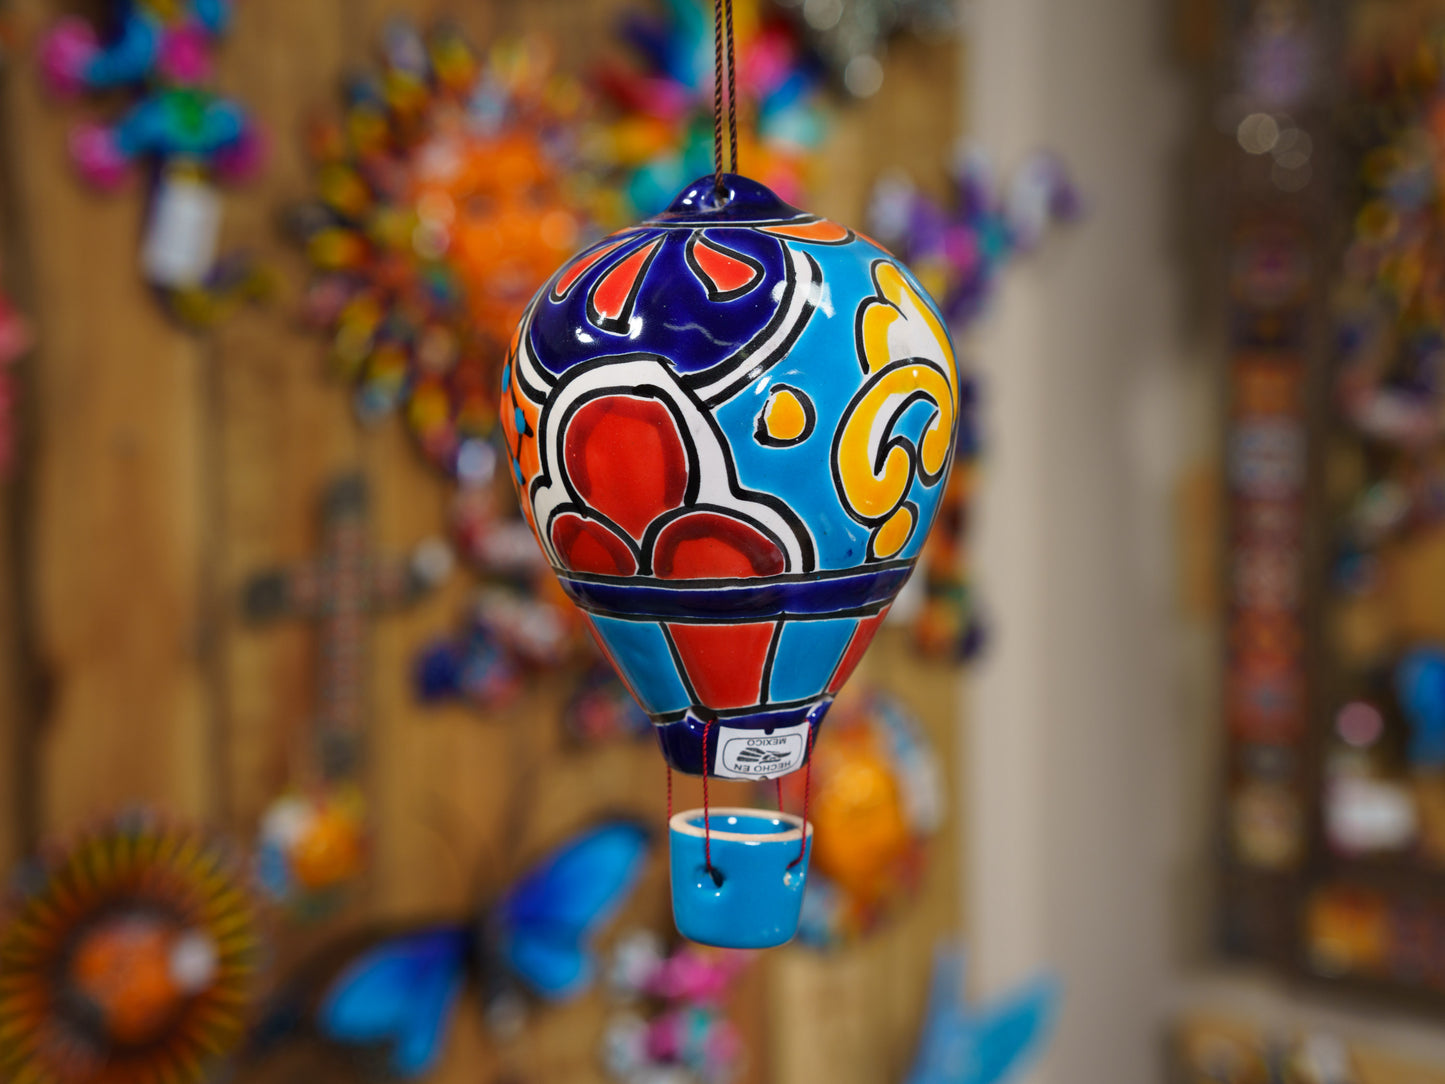 Hanging Hot Air Balloon - Small Turquoise